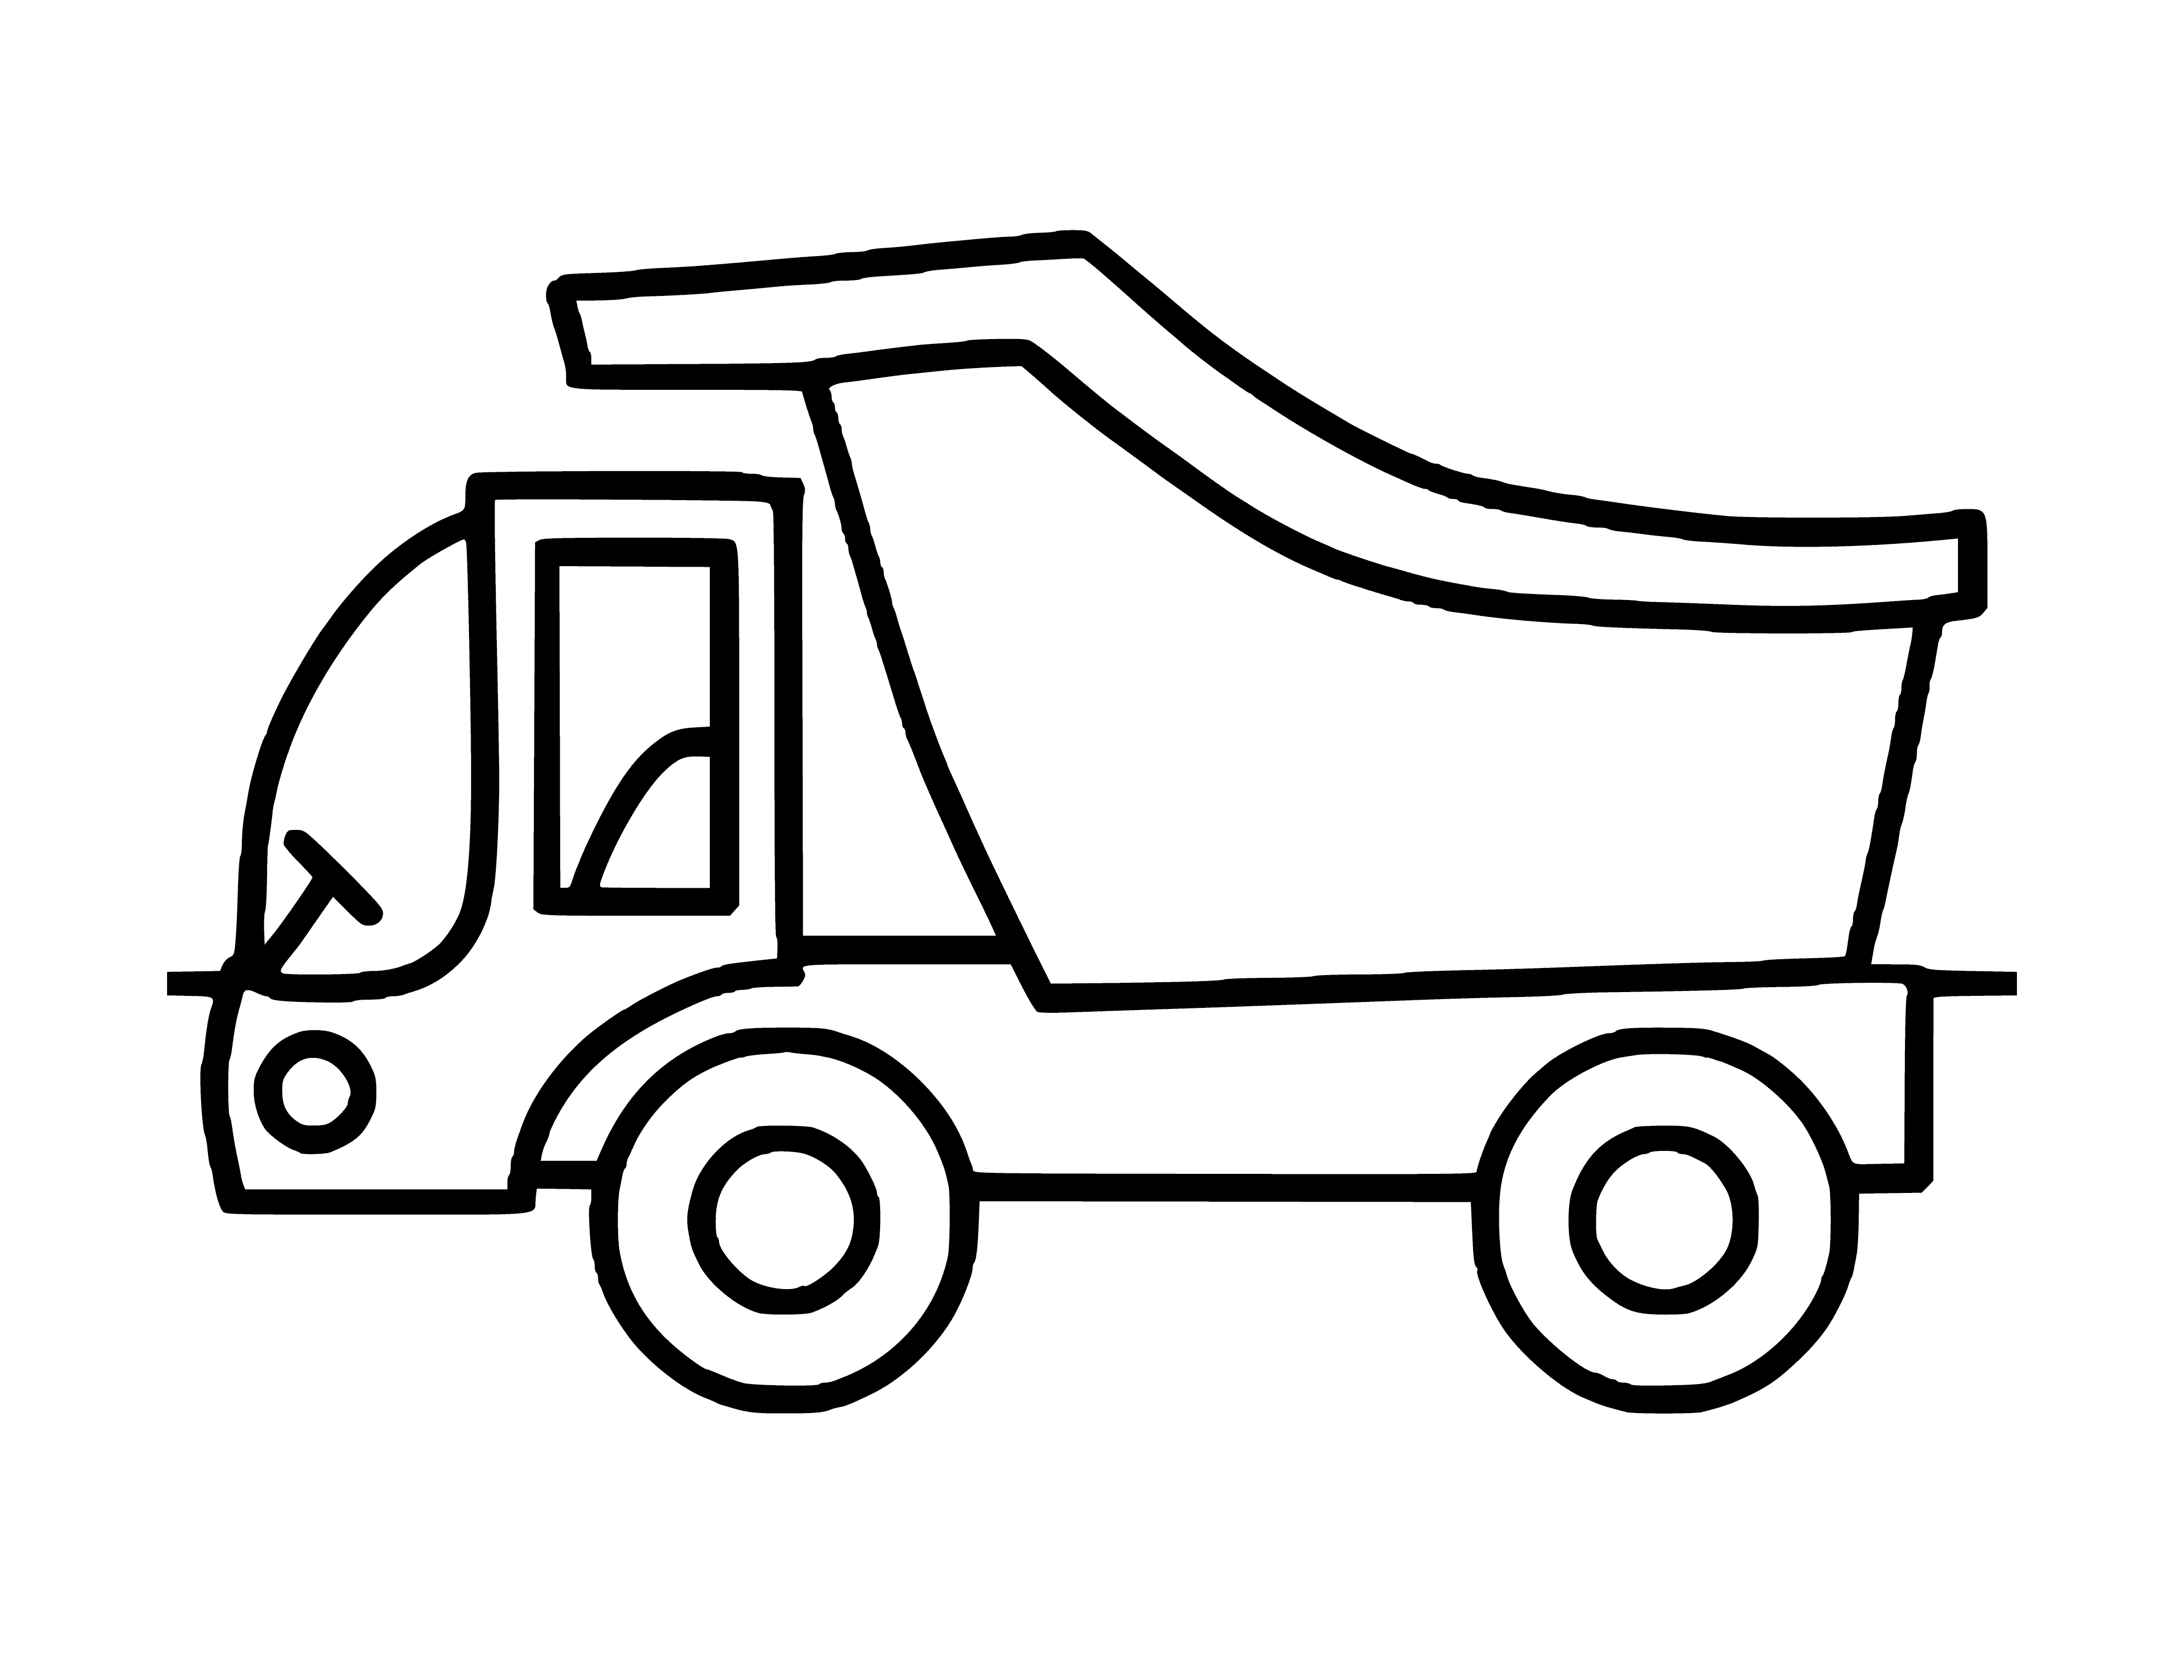 coloring page: A big yellow truck with orange and black stripes, a big exhaust pipe, a big grill, and four big tires with two headlights. #coloringpage